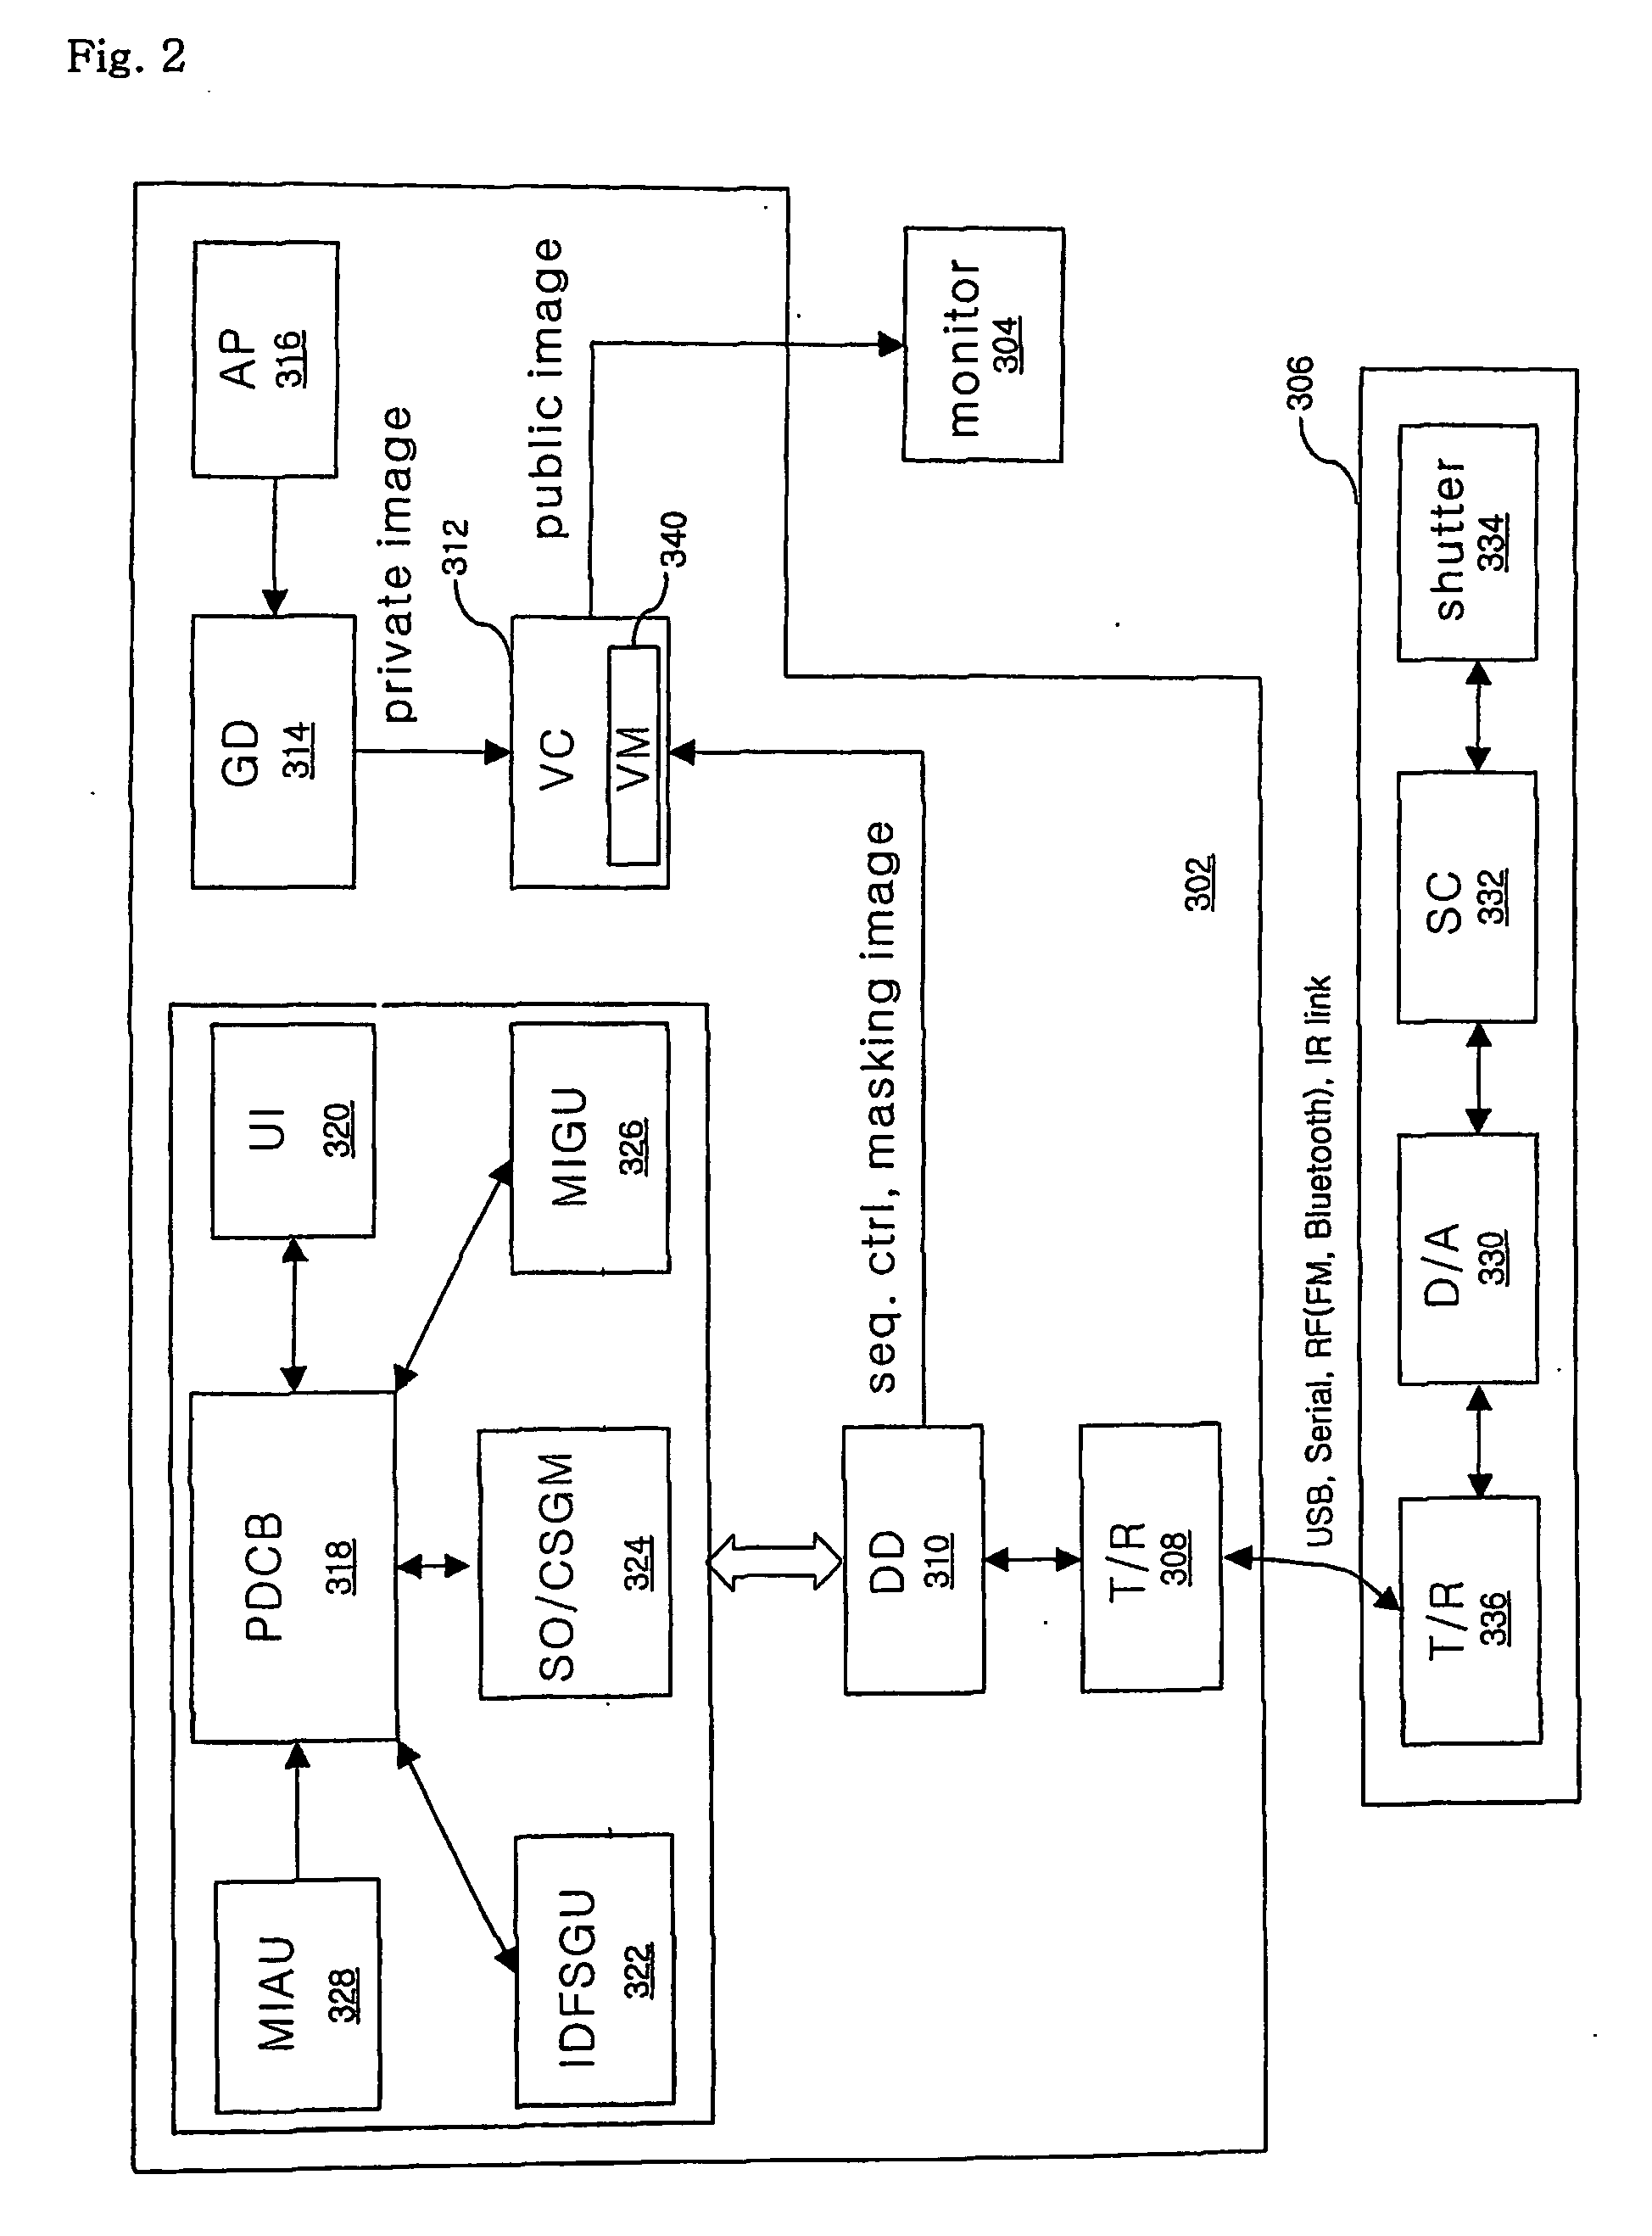 Method of transmitting signal for indicating opening or shuttering of a shutter in a private image display device